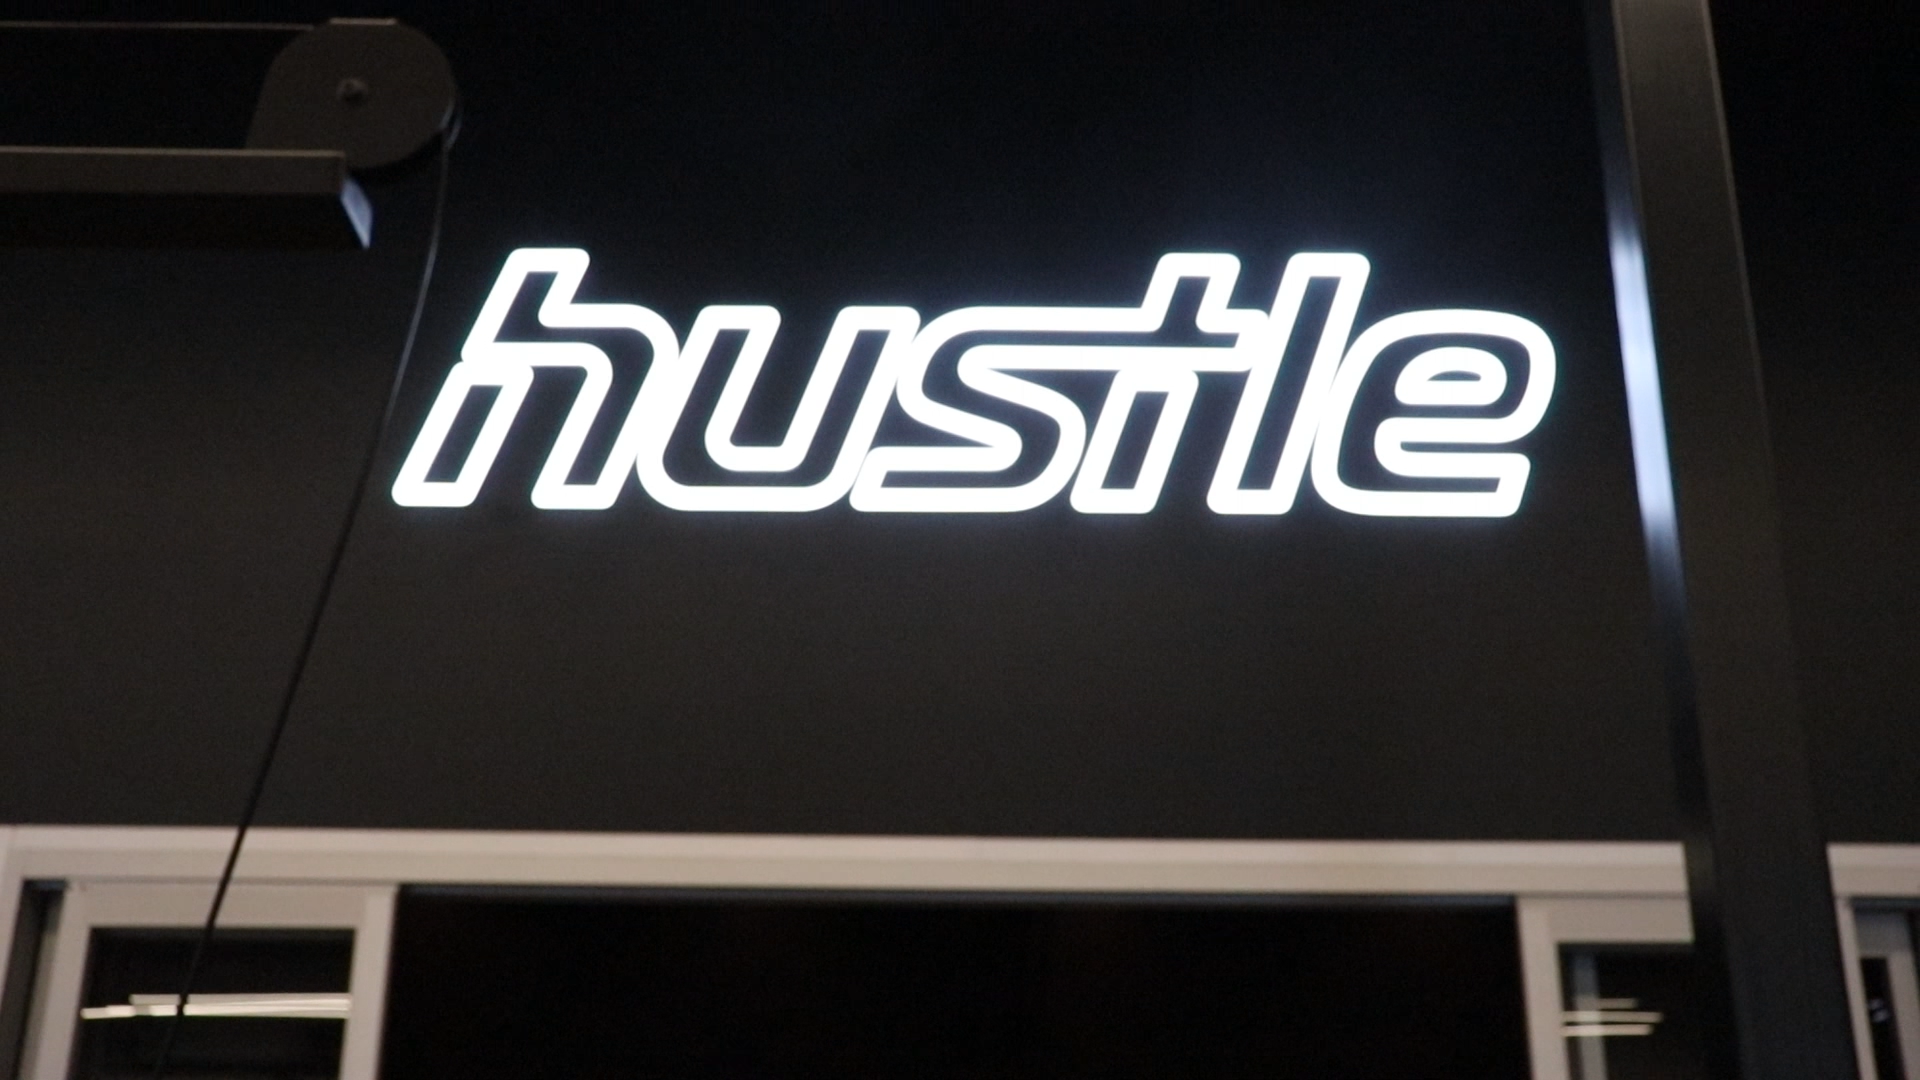 Neon style sign for Hustle, a strength and cardio studio inside Styles Studios, a fitness club in Peoria, IL.